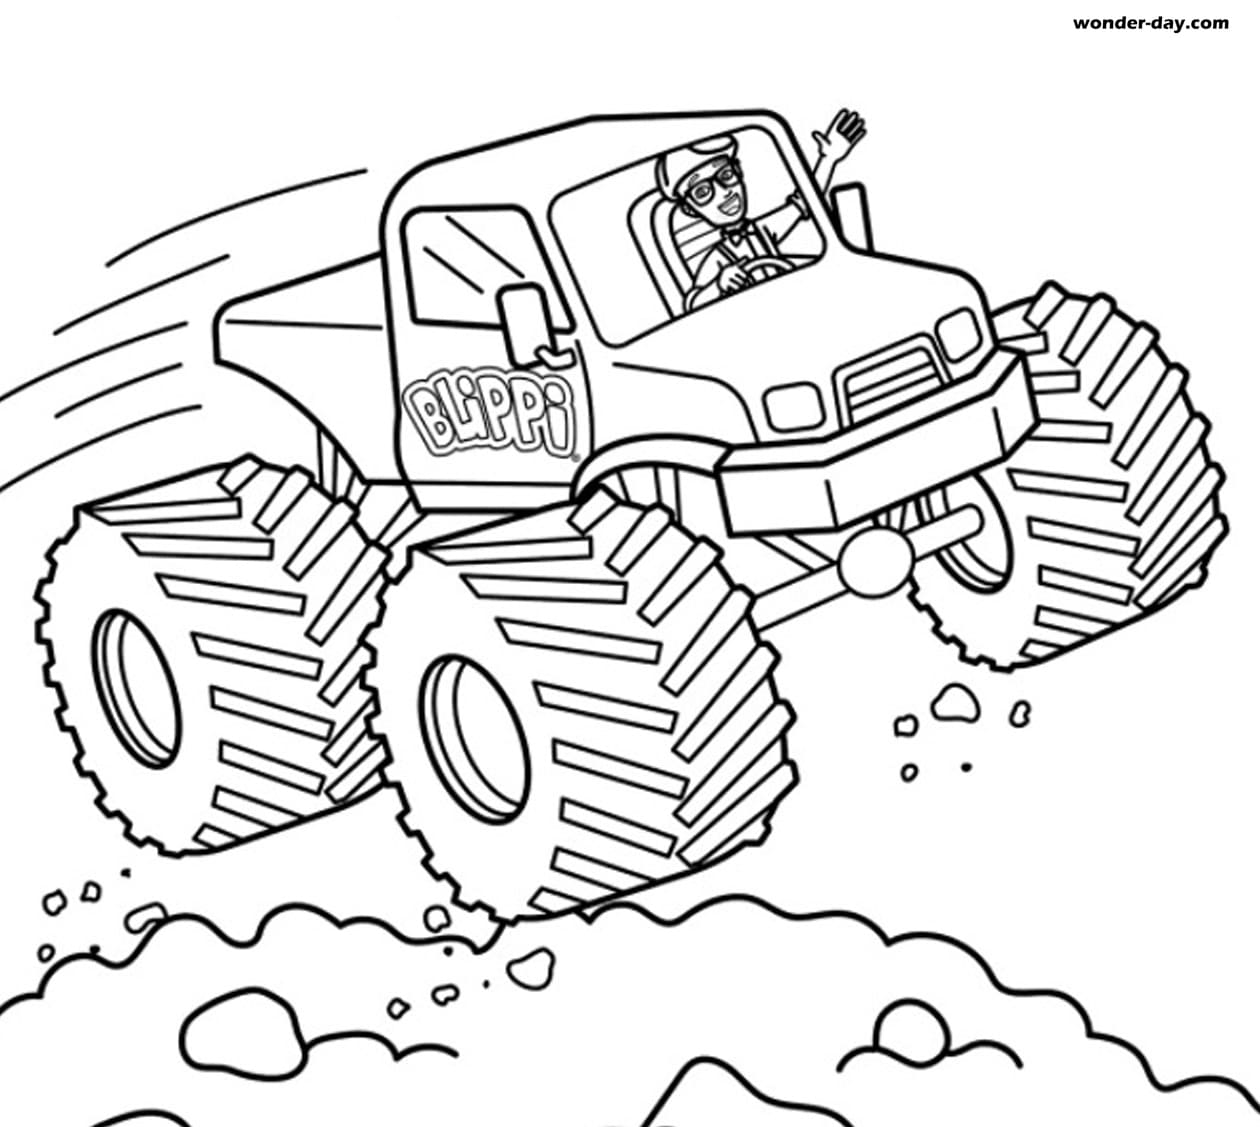 blippi-coloring-pages-printable-2023-calendar-printable